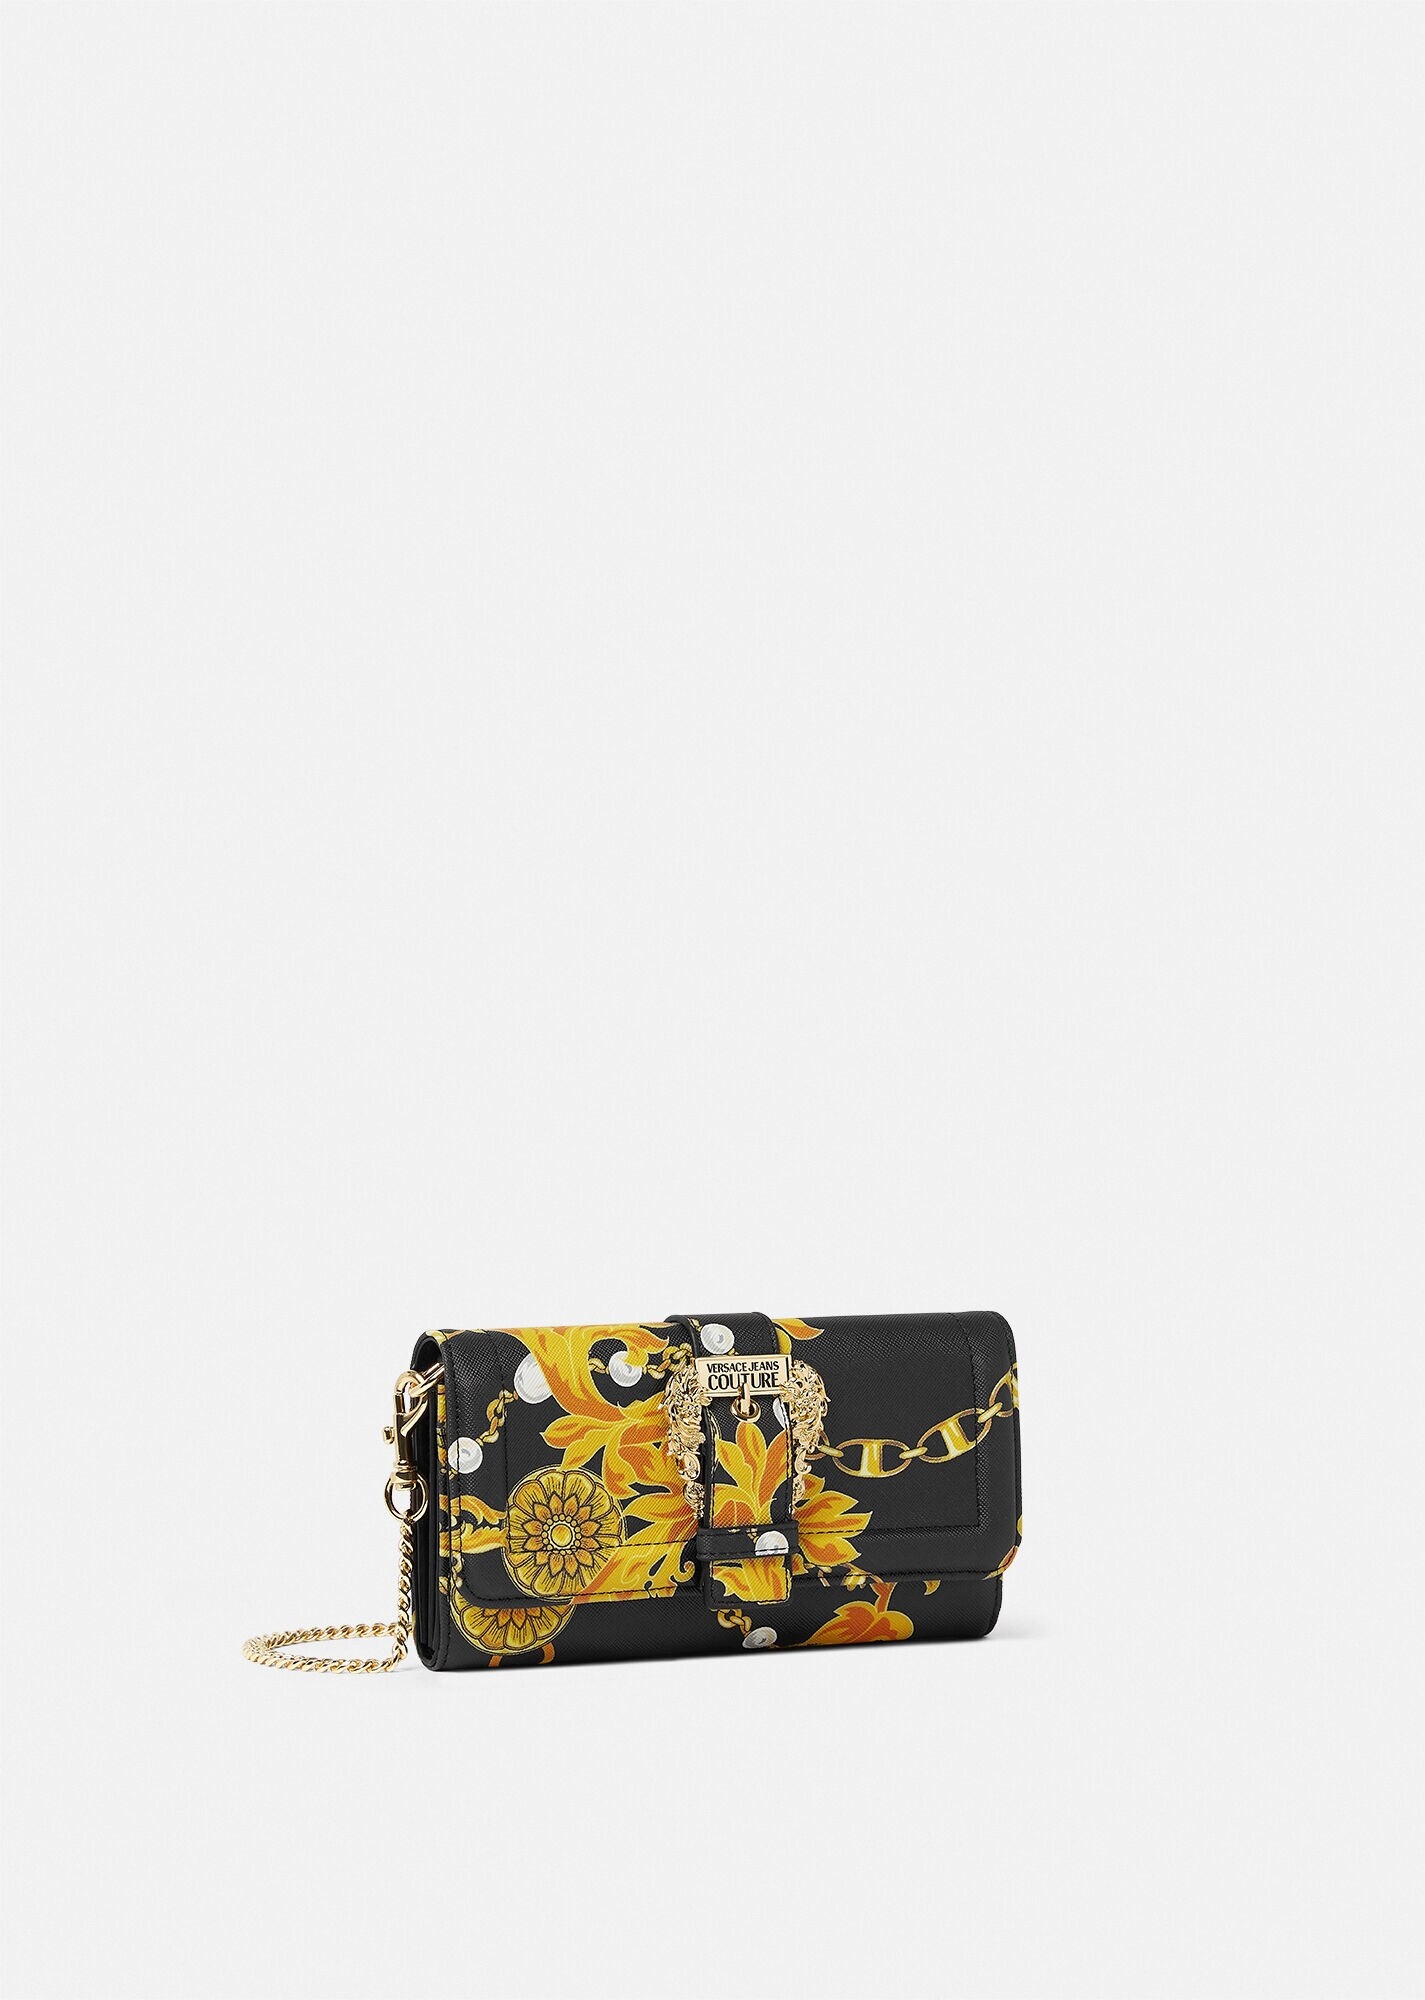 Chain Couture Couture1 Clutch - 2